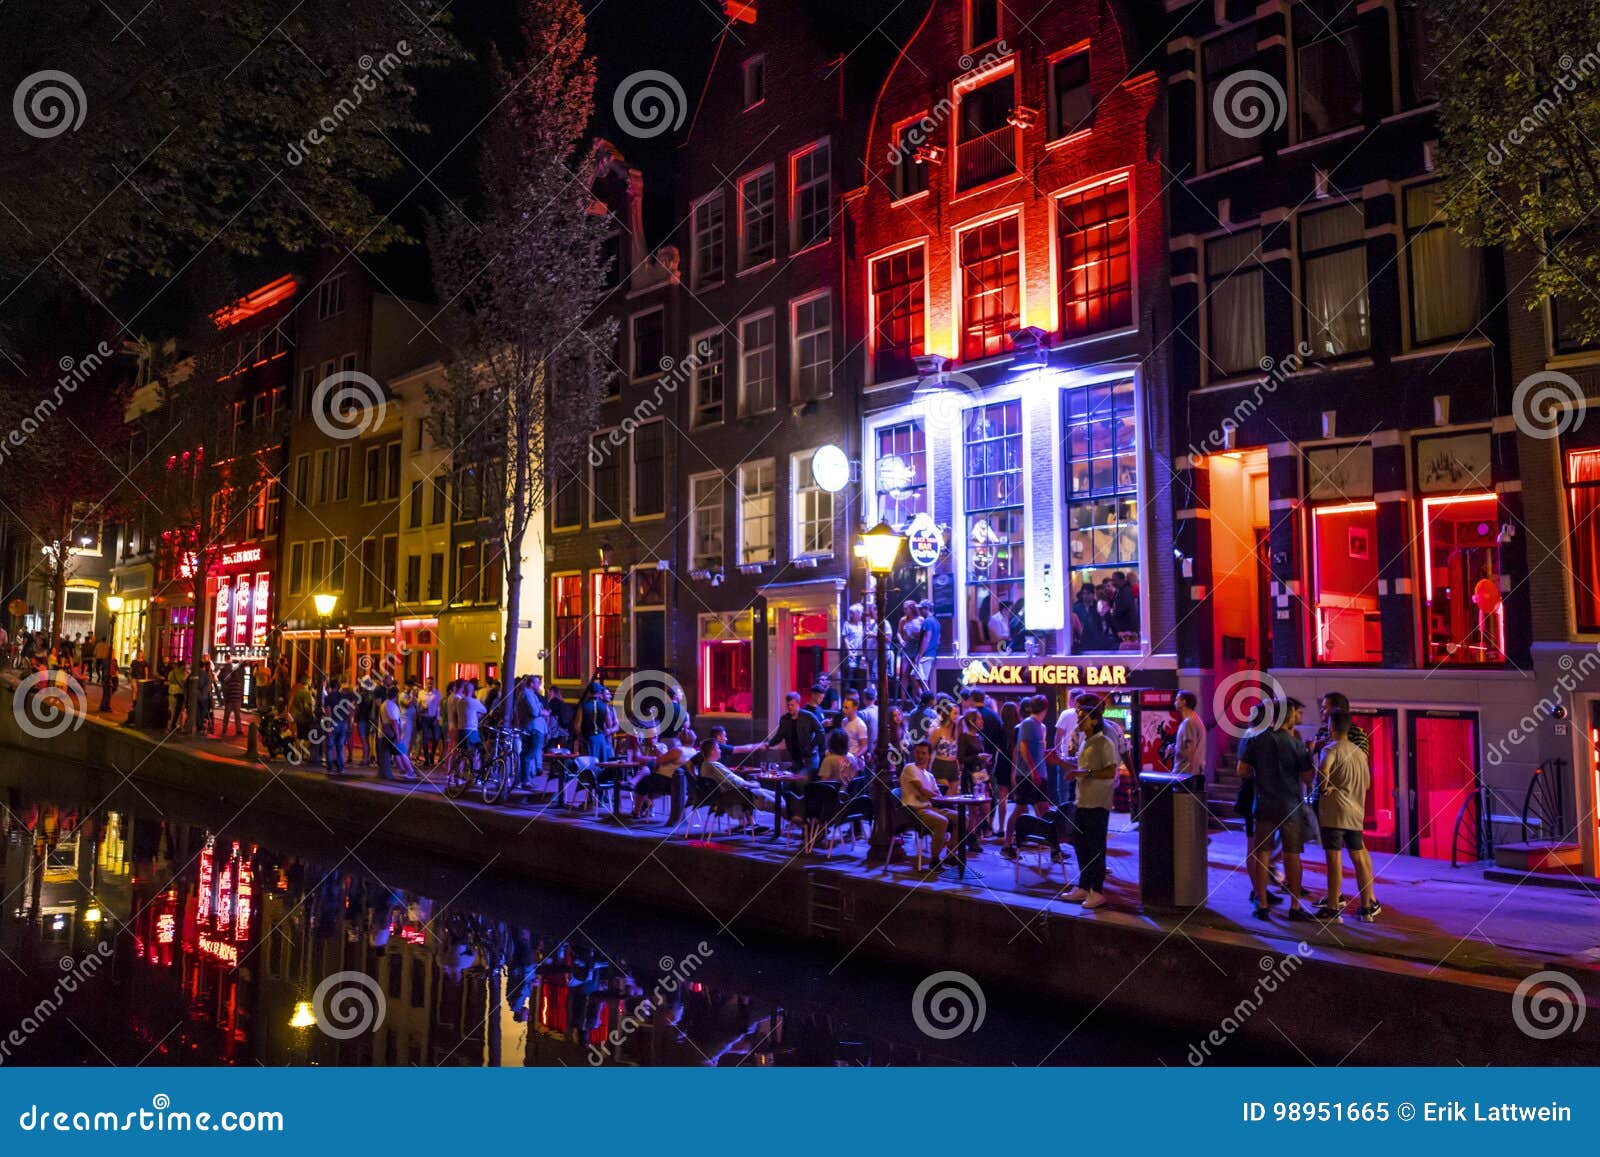 Colorful Amsterdam - the Red Light District at Night - AMSTERDAM - the NETHERLANDS - JULY 20, Editorial Image Image of amsterdam, buildings: 98951665